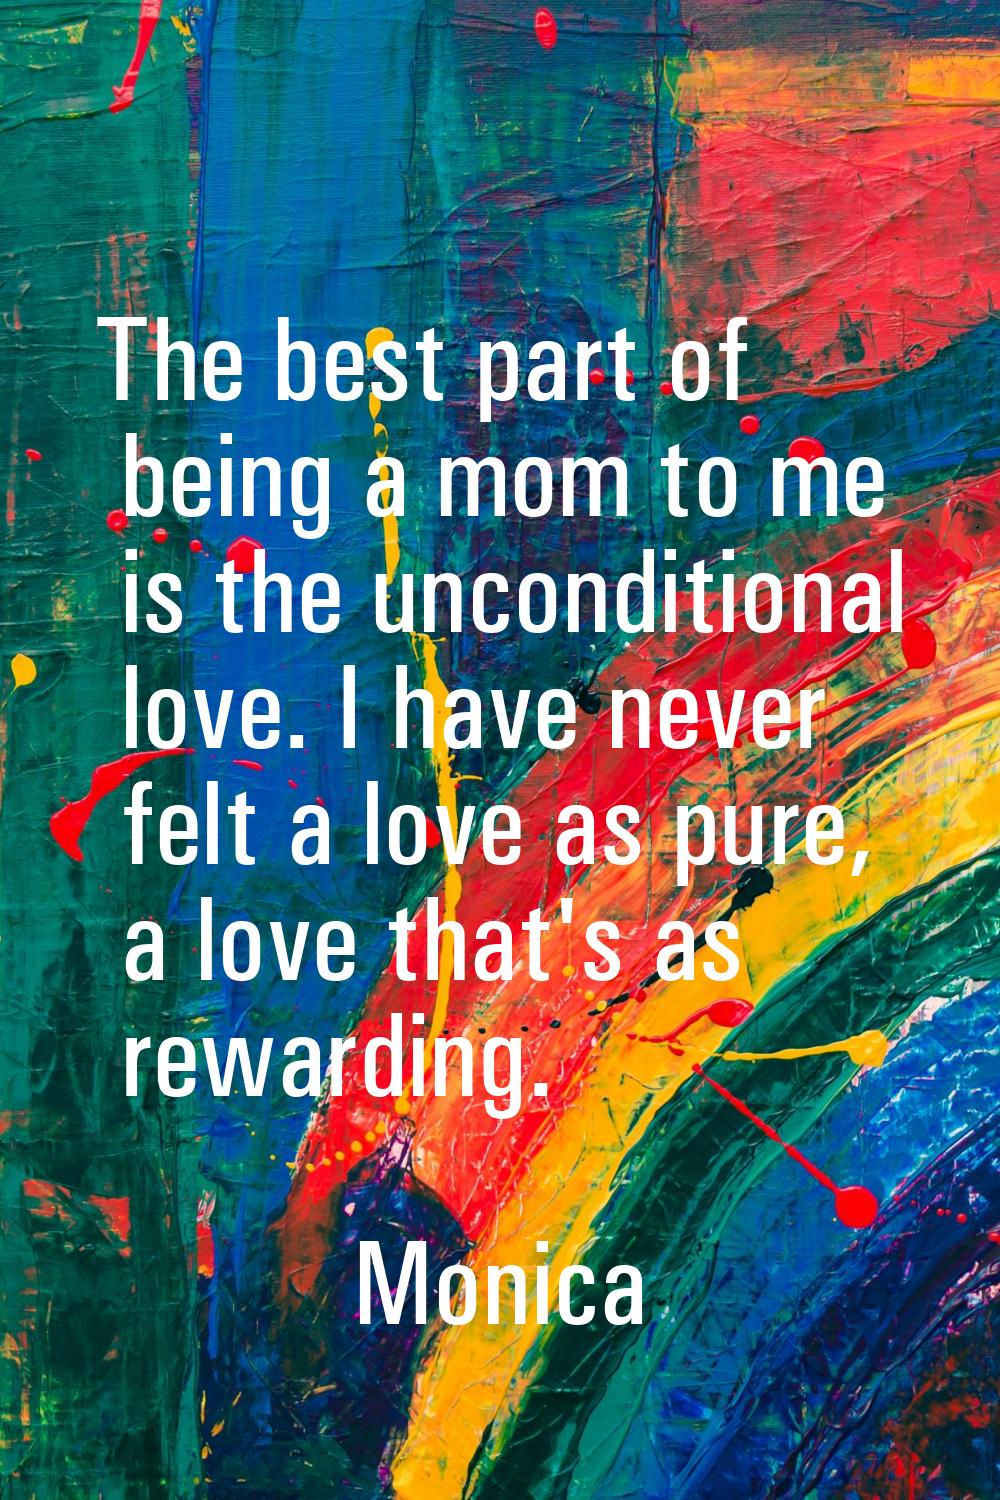 The best part of being a mom to me is the unconditional love. I have never felt a love as pure, a l